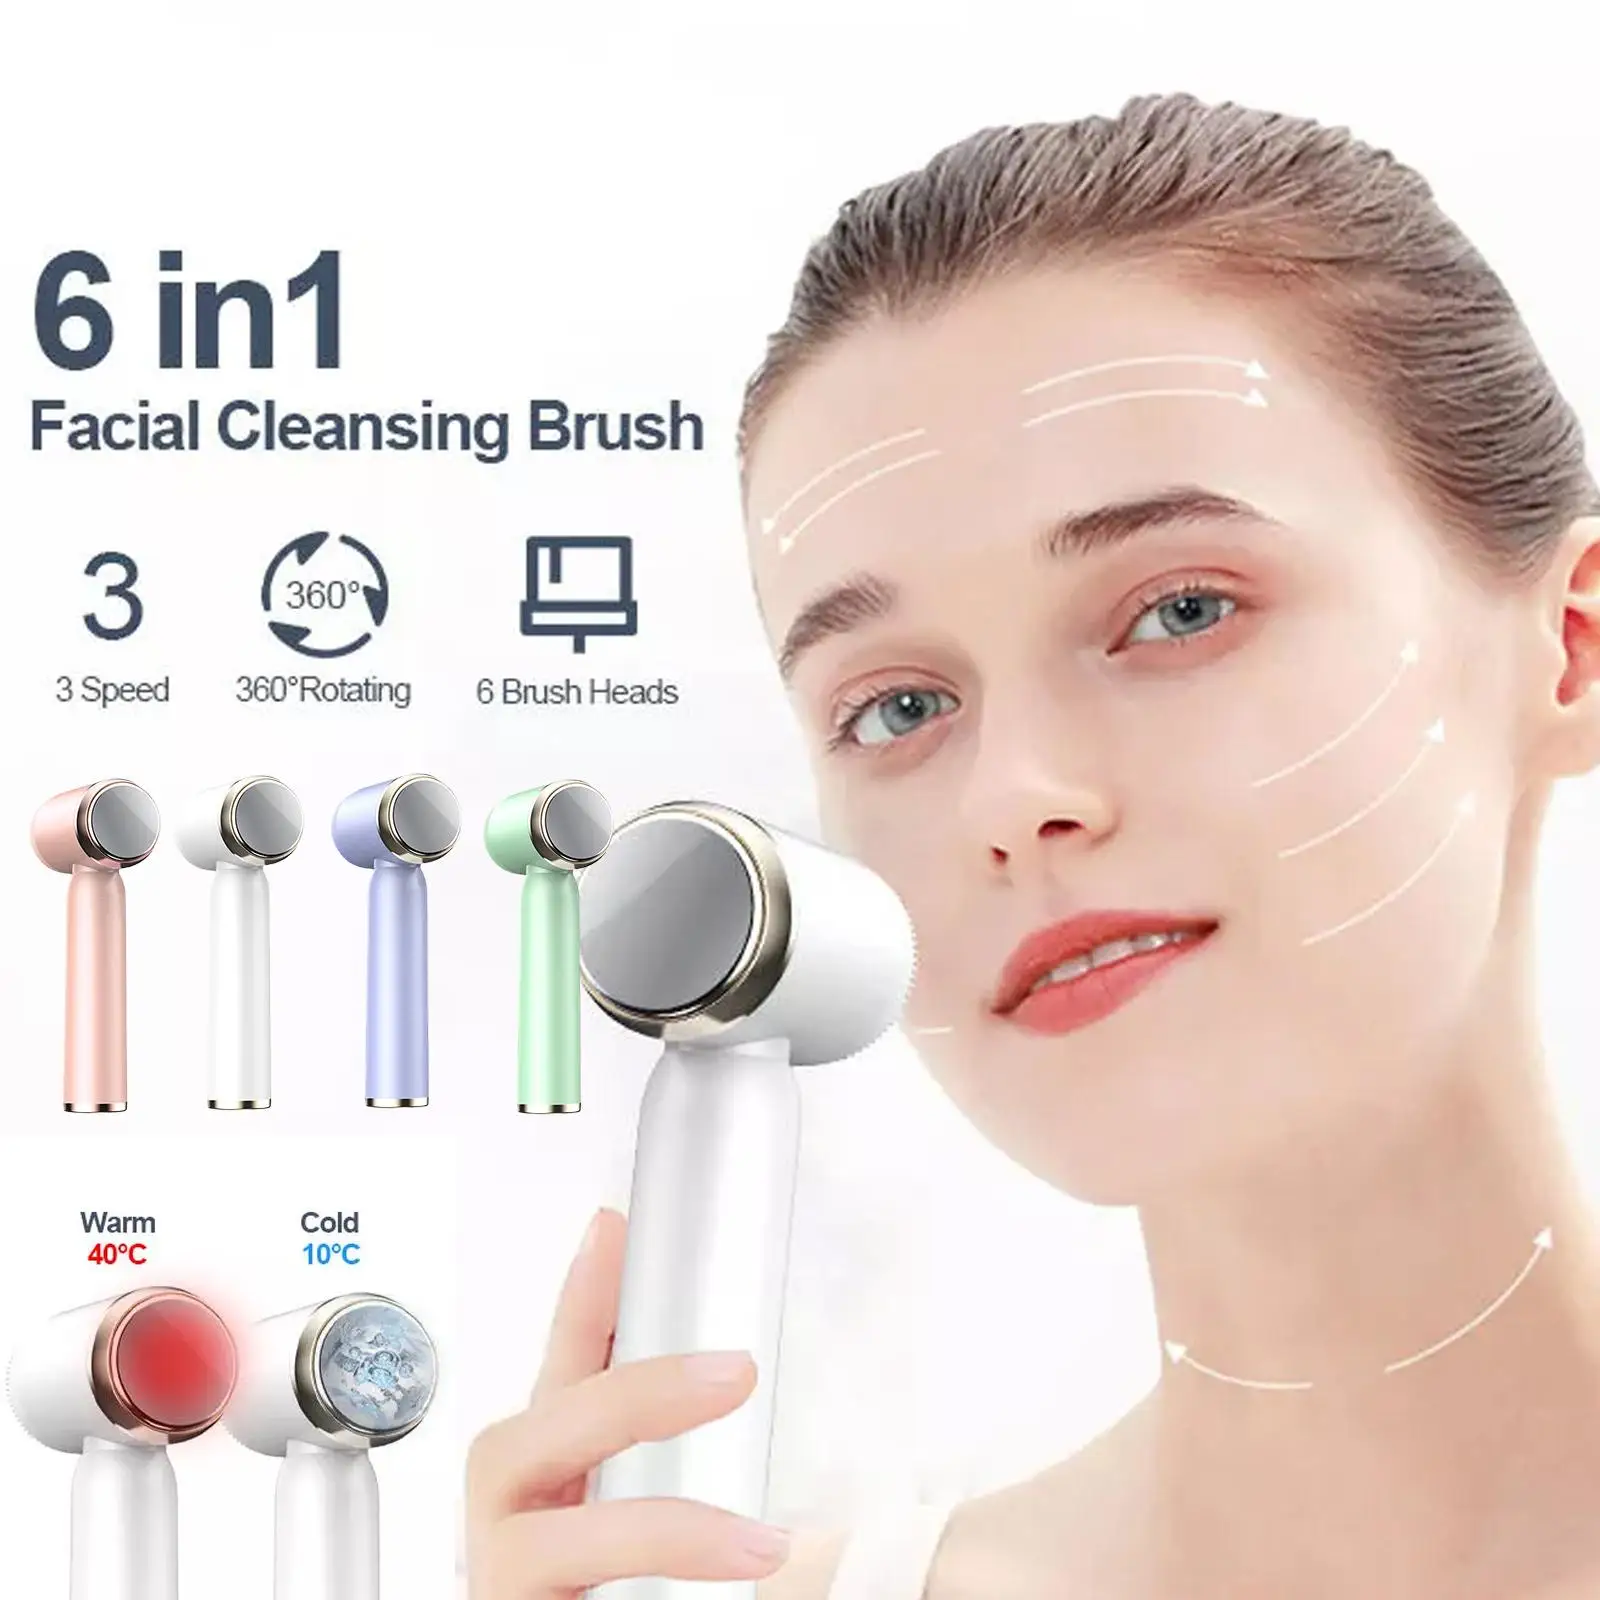 wqs integrated circuit control vertical vibration laboratory shaker vibrator particle analysis shaker vibrator with best price 6 In 1 With bag Hot Cool Face Cleansing Brush Electric Facial Brush Deep Pore Cleaner LCD Vibration Lifting Skin Firming